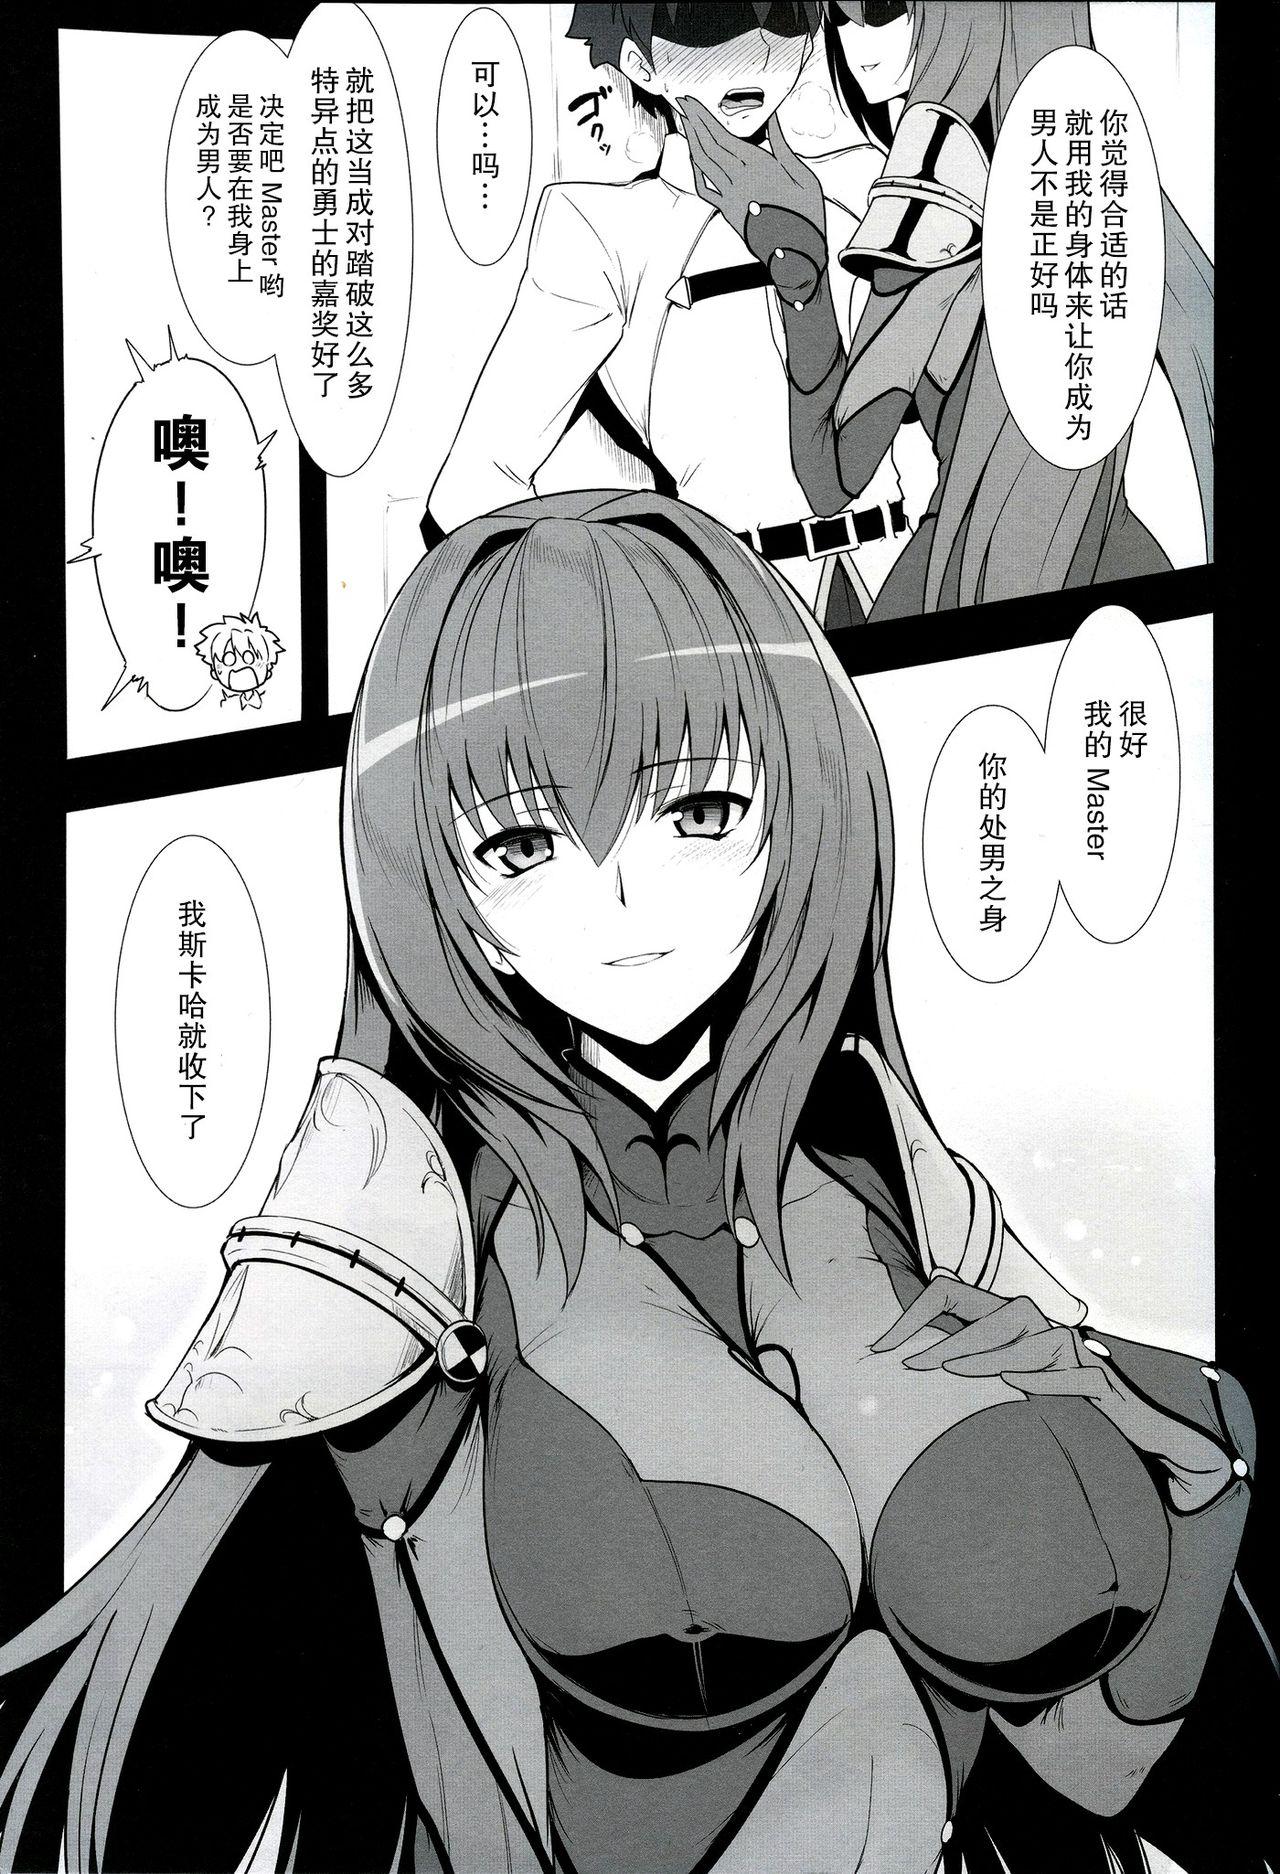 Jav AH! MY MISTRESS! - Fate grand order And - Page 7